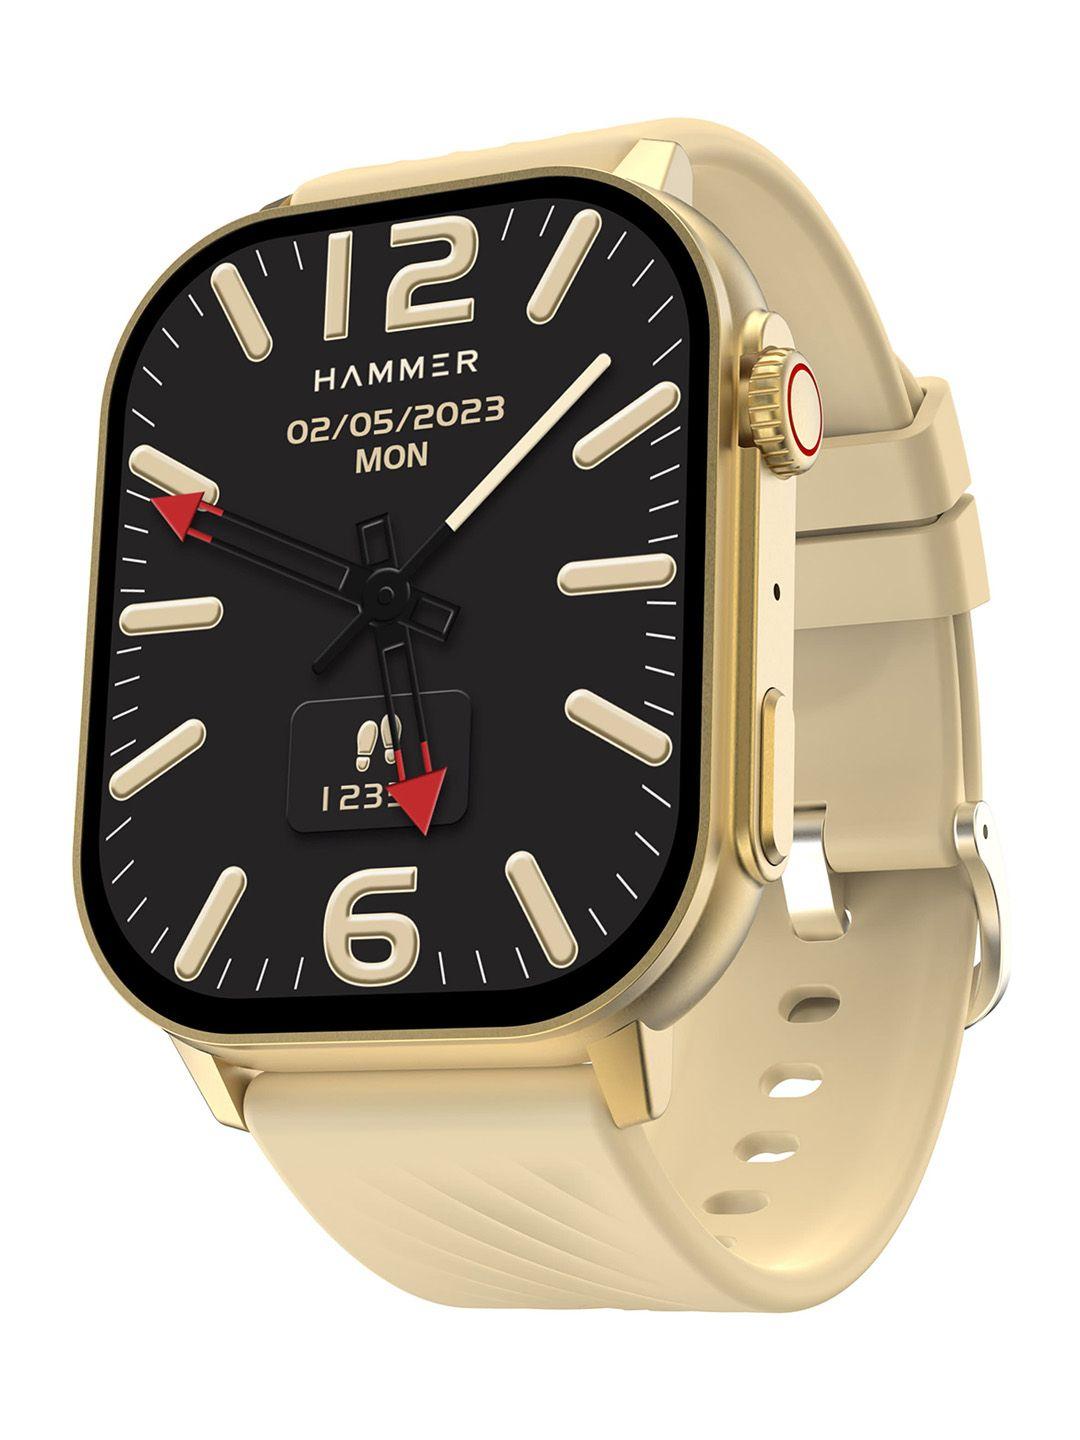 HAMMER Champagne Gold Arctic 2.04 Inch SUPER AMOLED Smart Watch with BT Calling